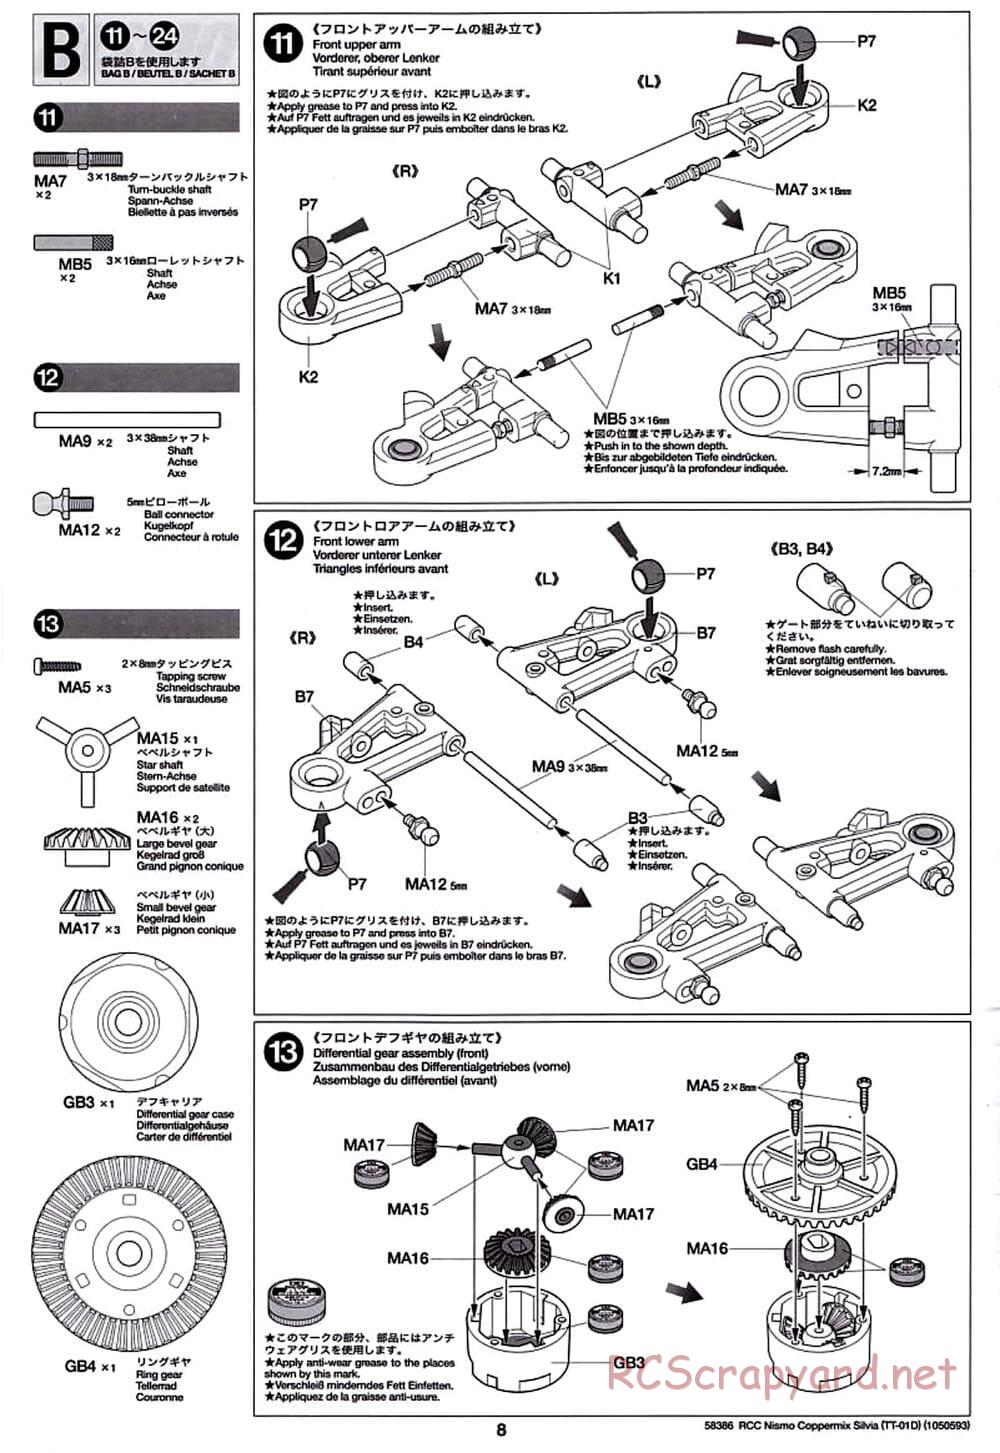 Tamiya - Nismo Coppermix Silvia Drift Spec - TT-01D Chassis - Manual - Page 8